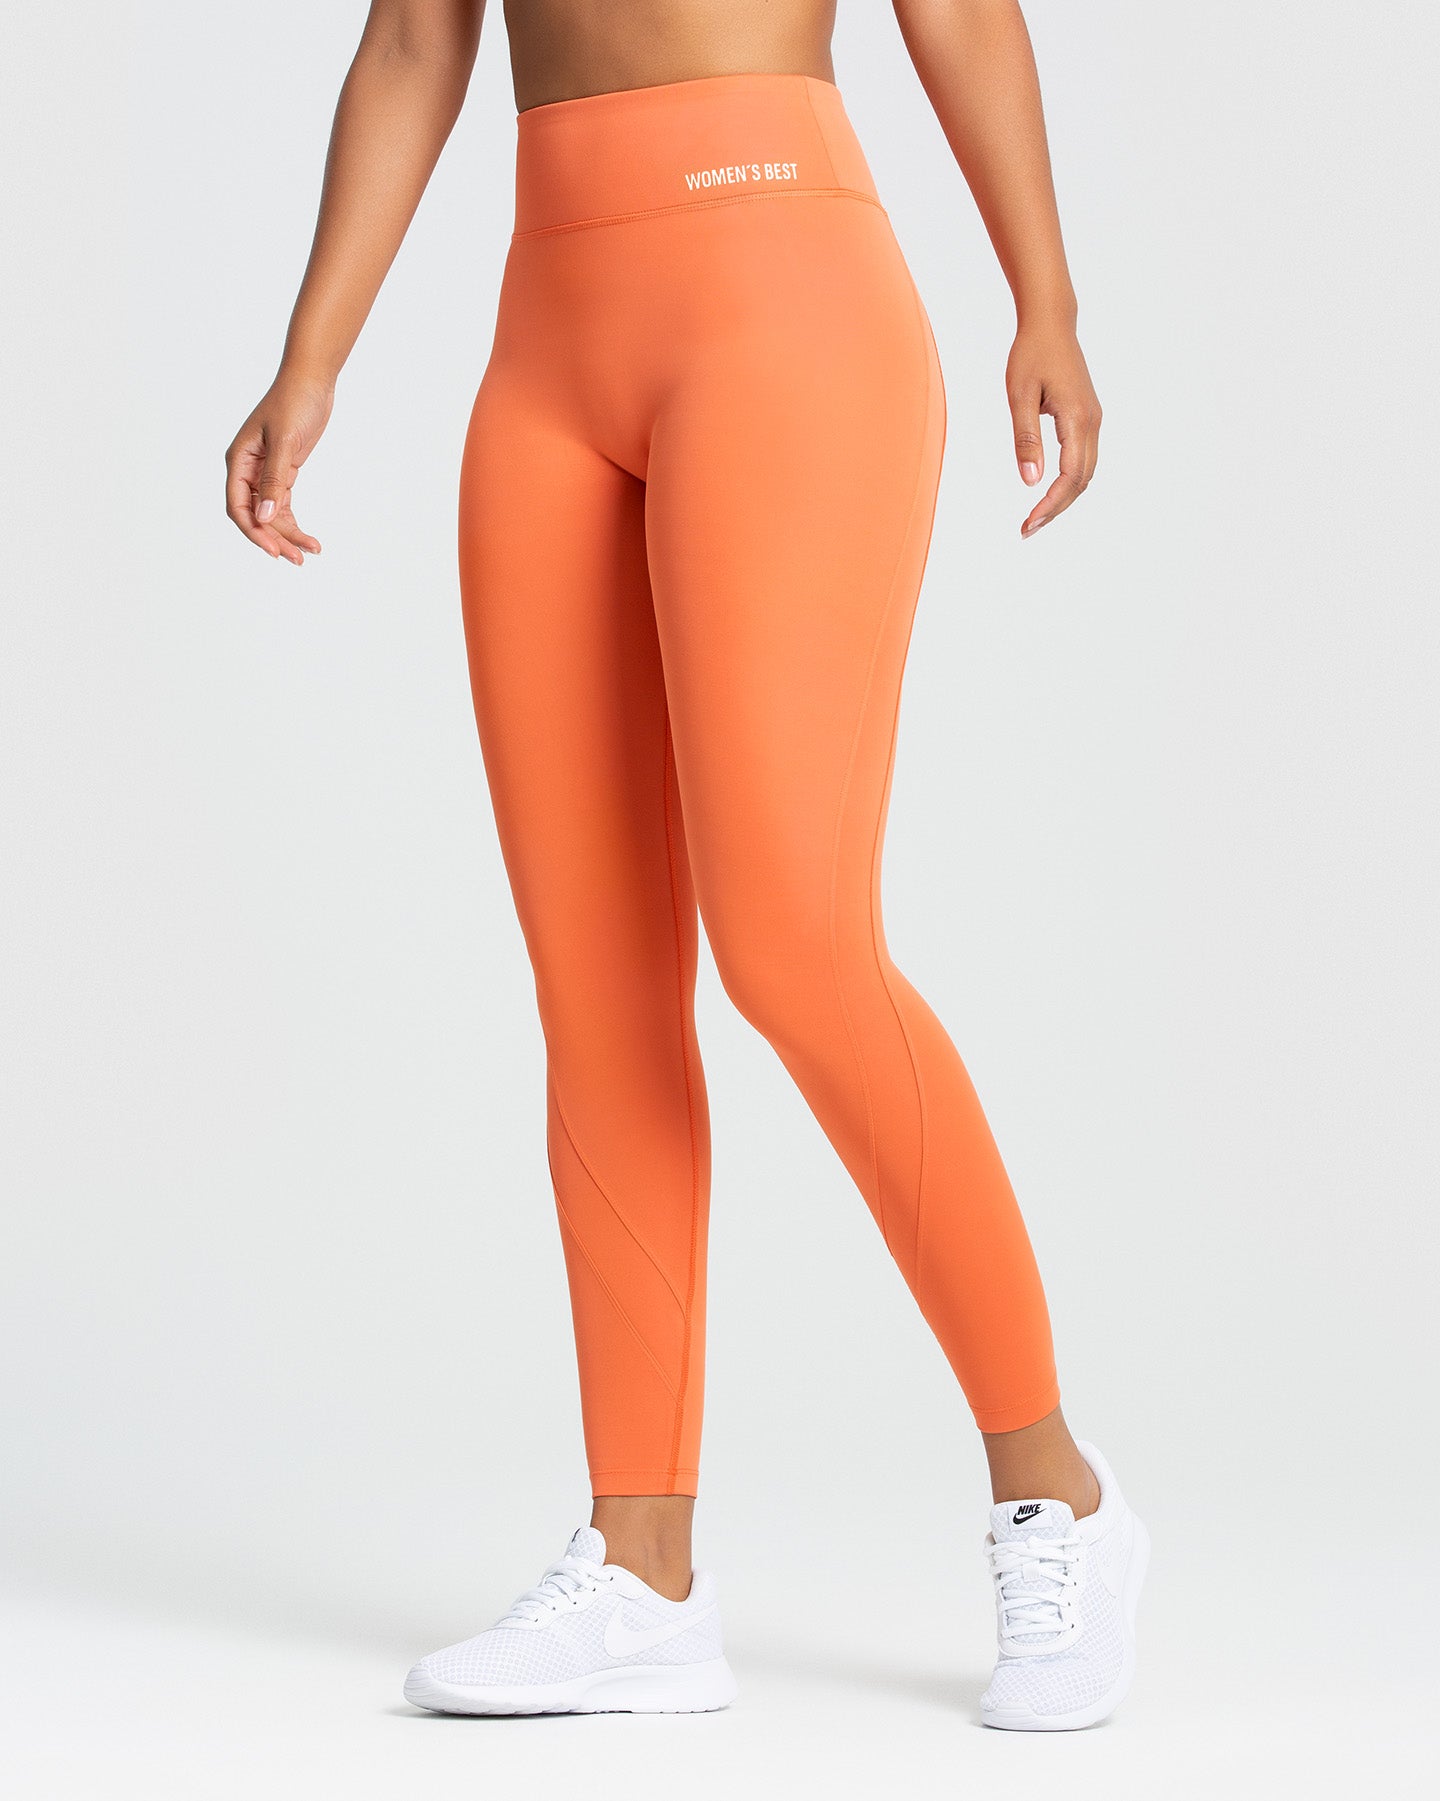 Bo And Tee Surge Leggings Reviewed  International Society of Precision  Agriculture